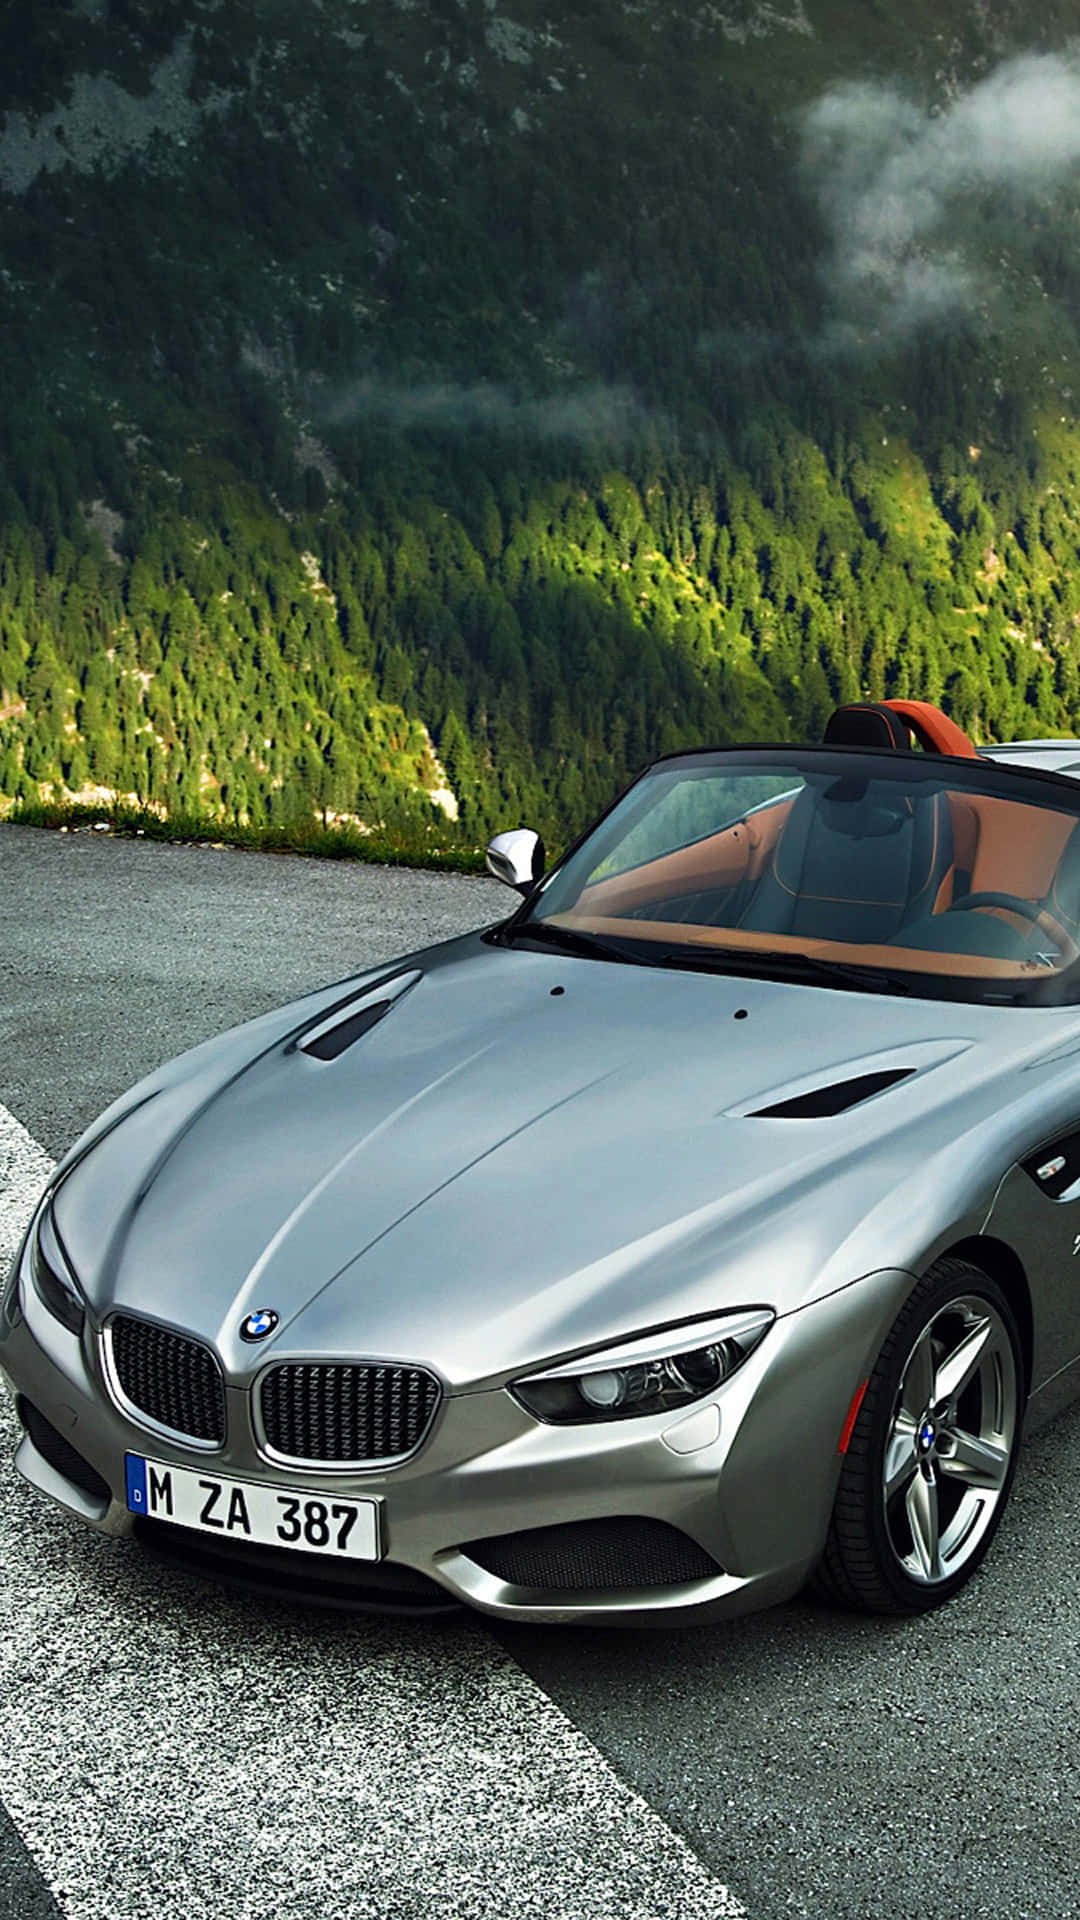 Topdown Bmw Android Wallpaper